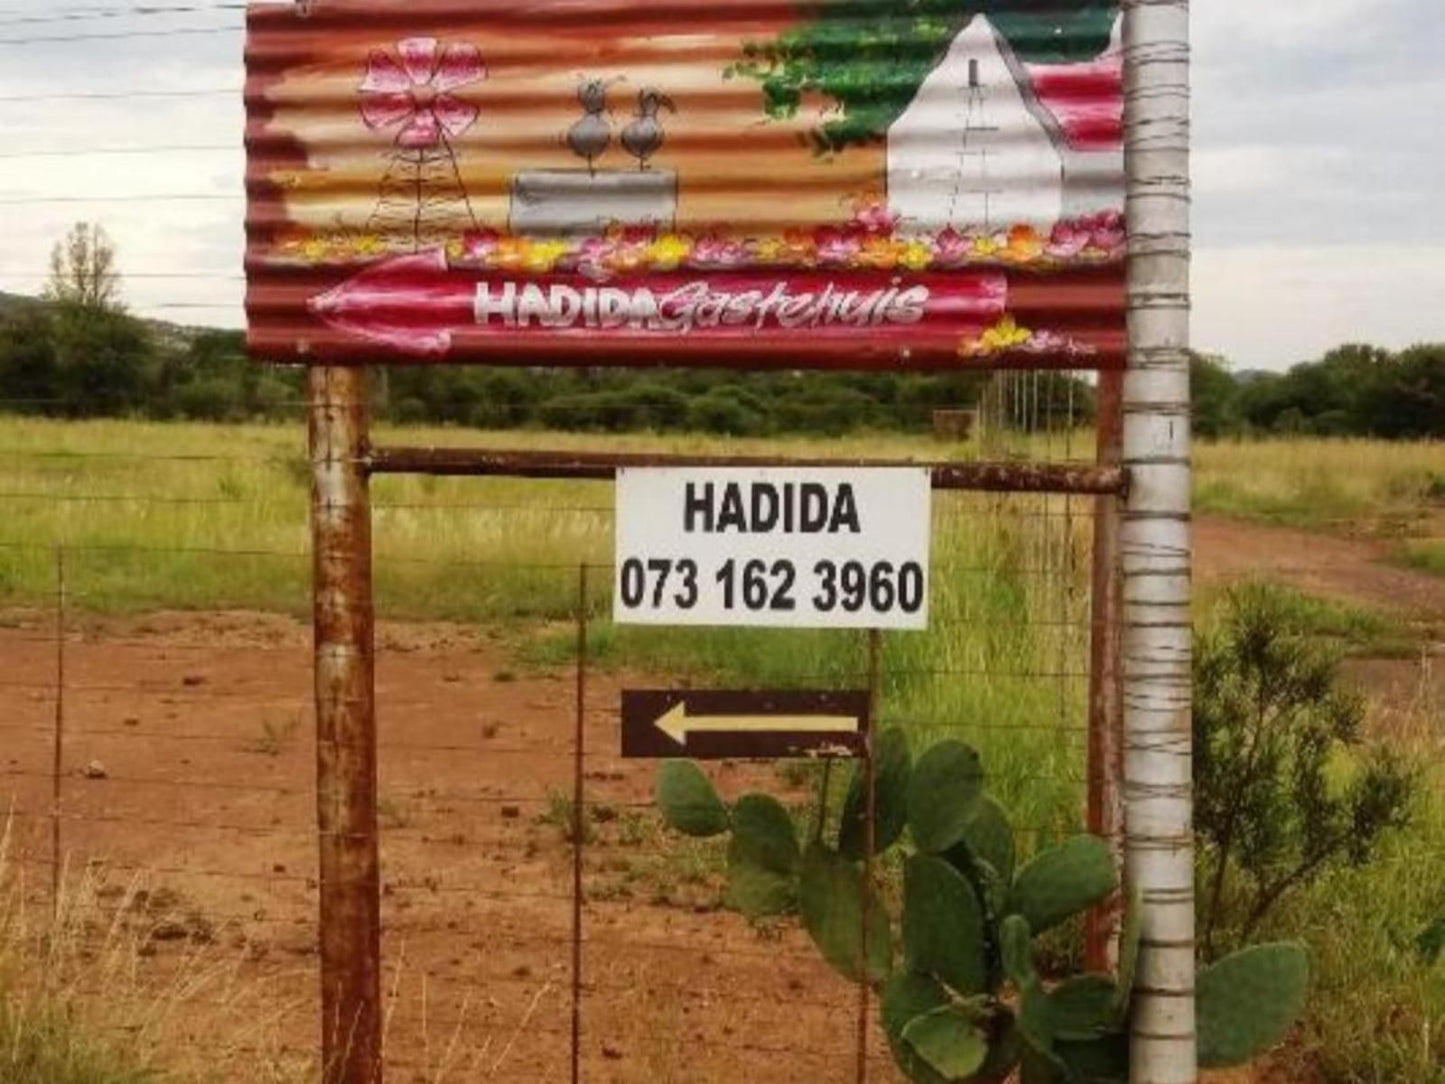 Hadida Guesthouse Swartruggens North West Province South Africa Sign